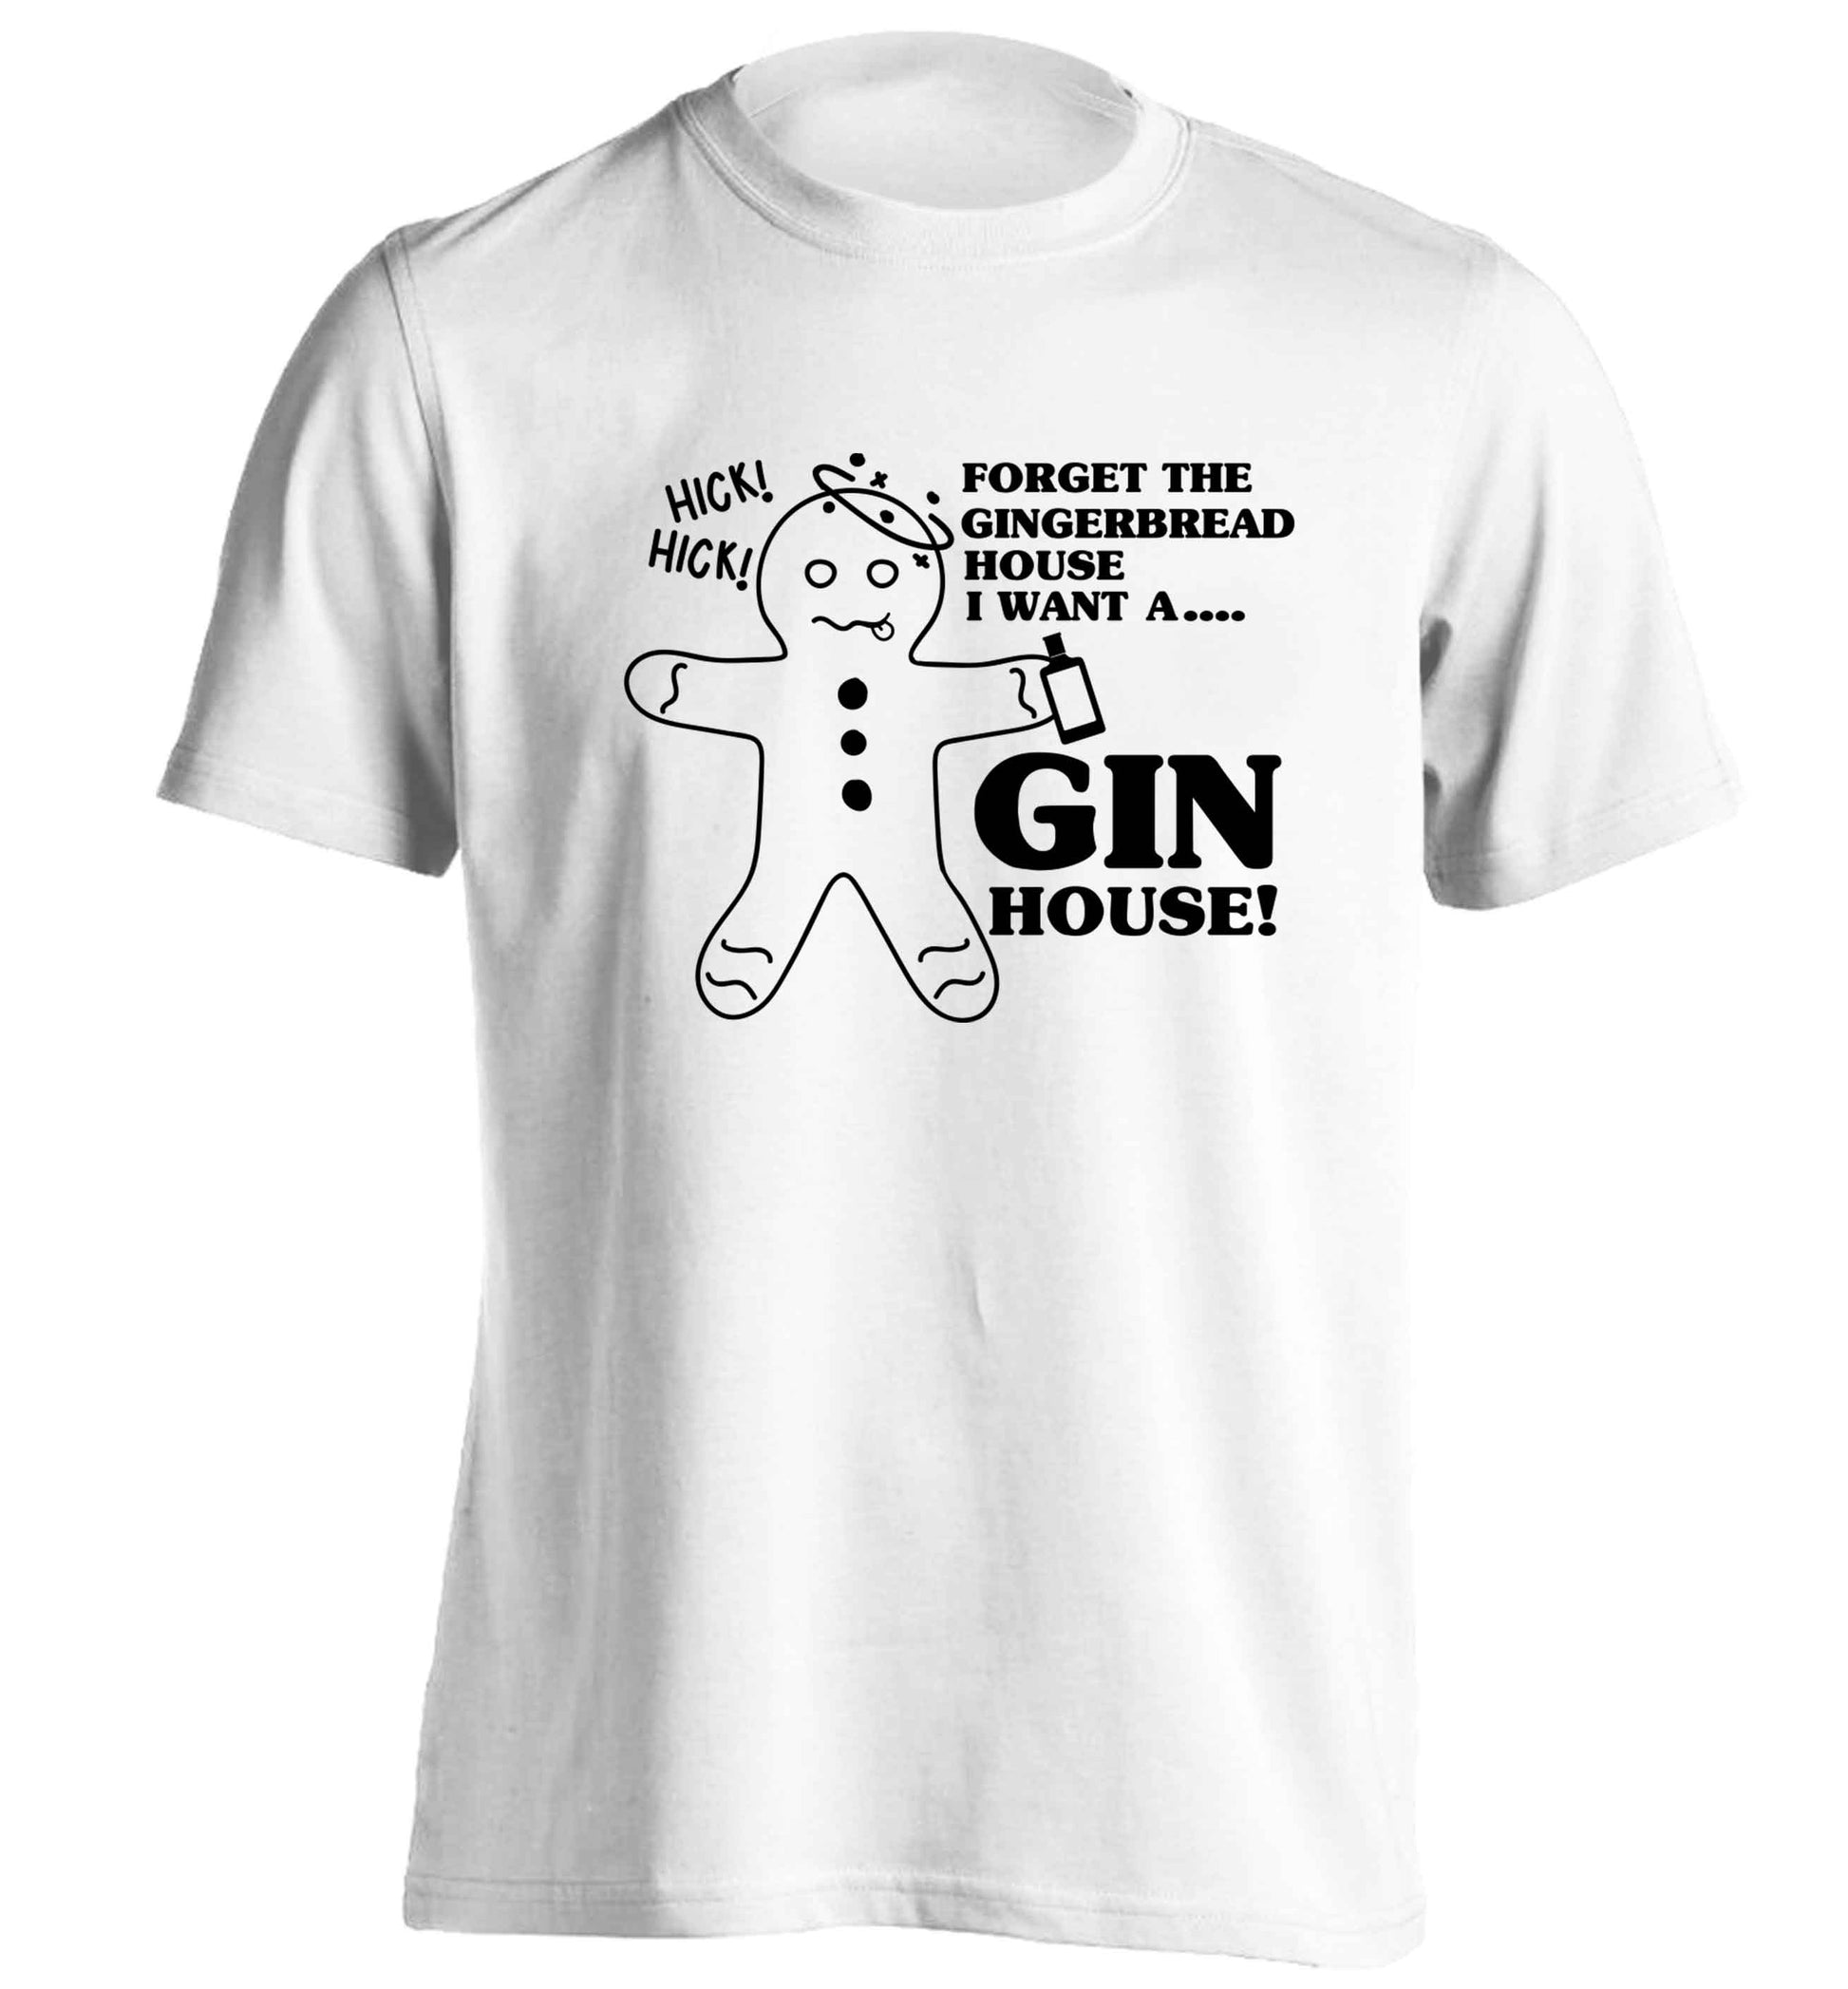 Forget the gingerbread house I want a gin house adults unisex white Tshirt 2XL